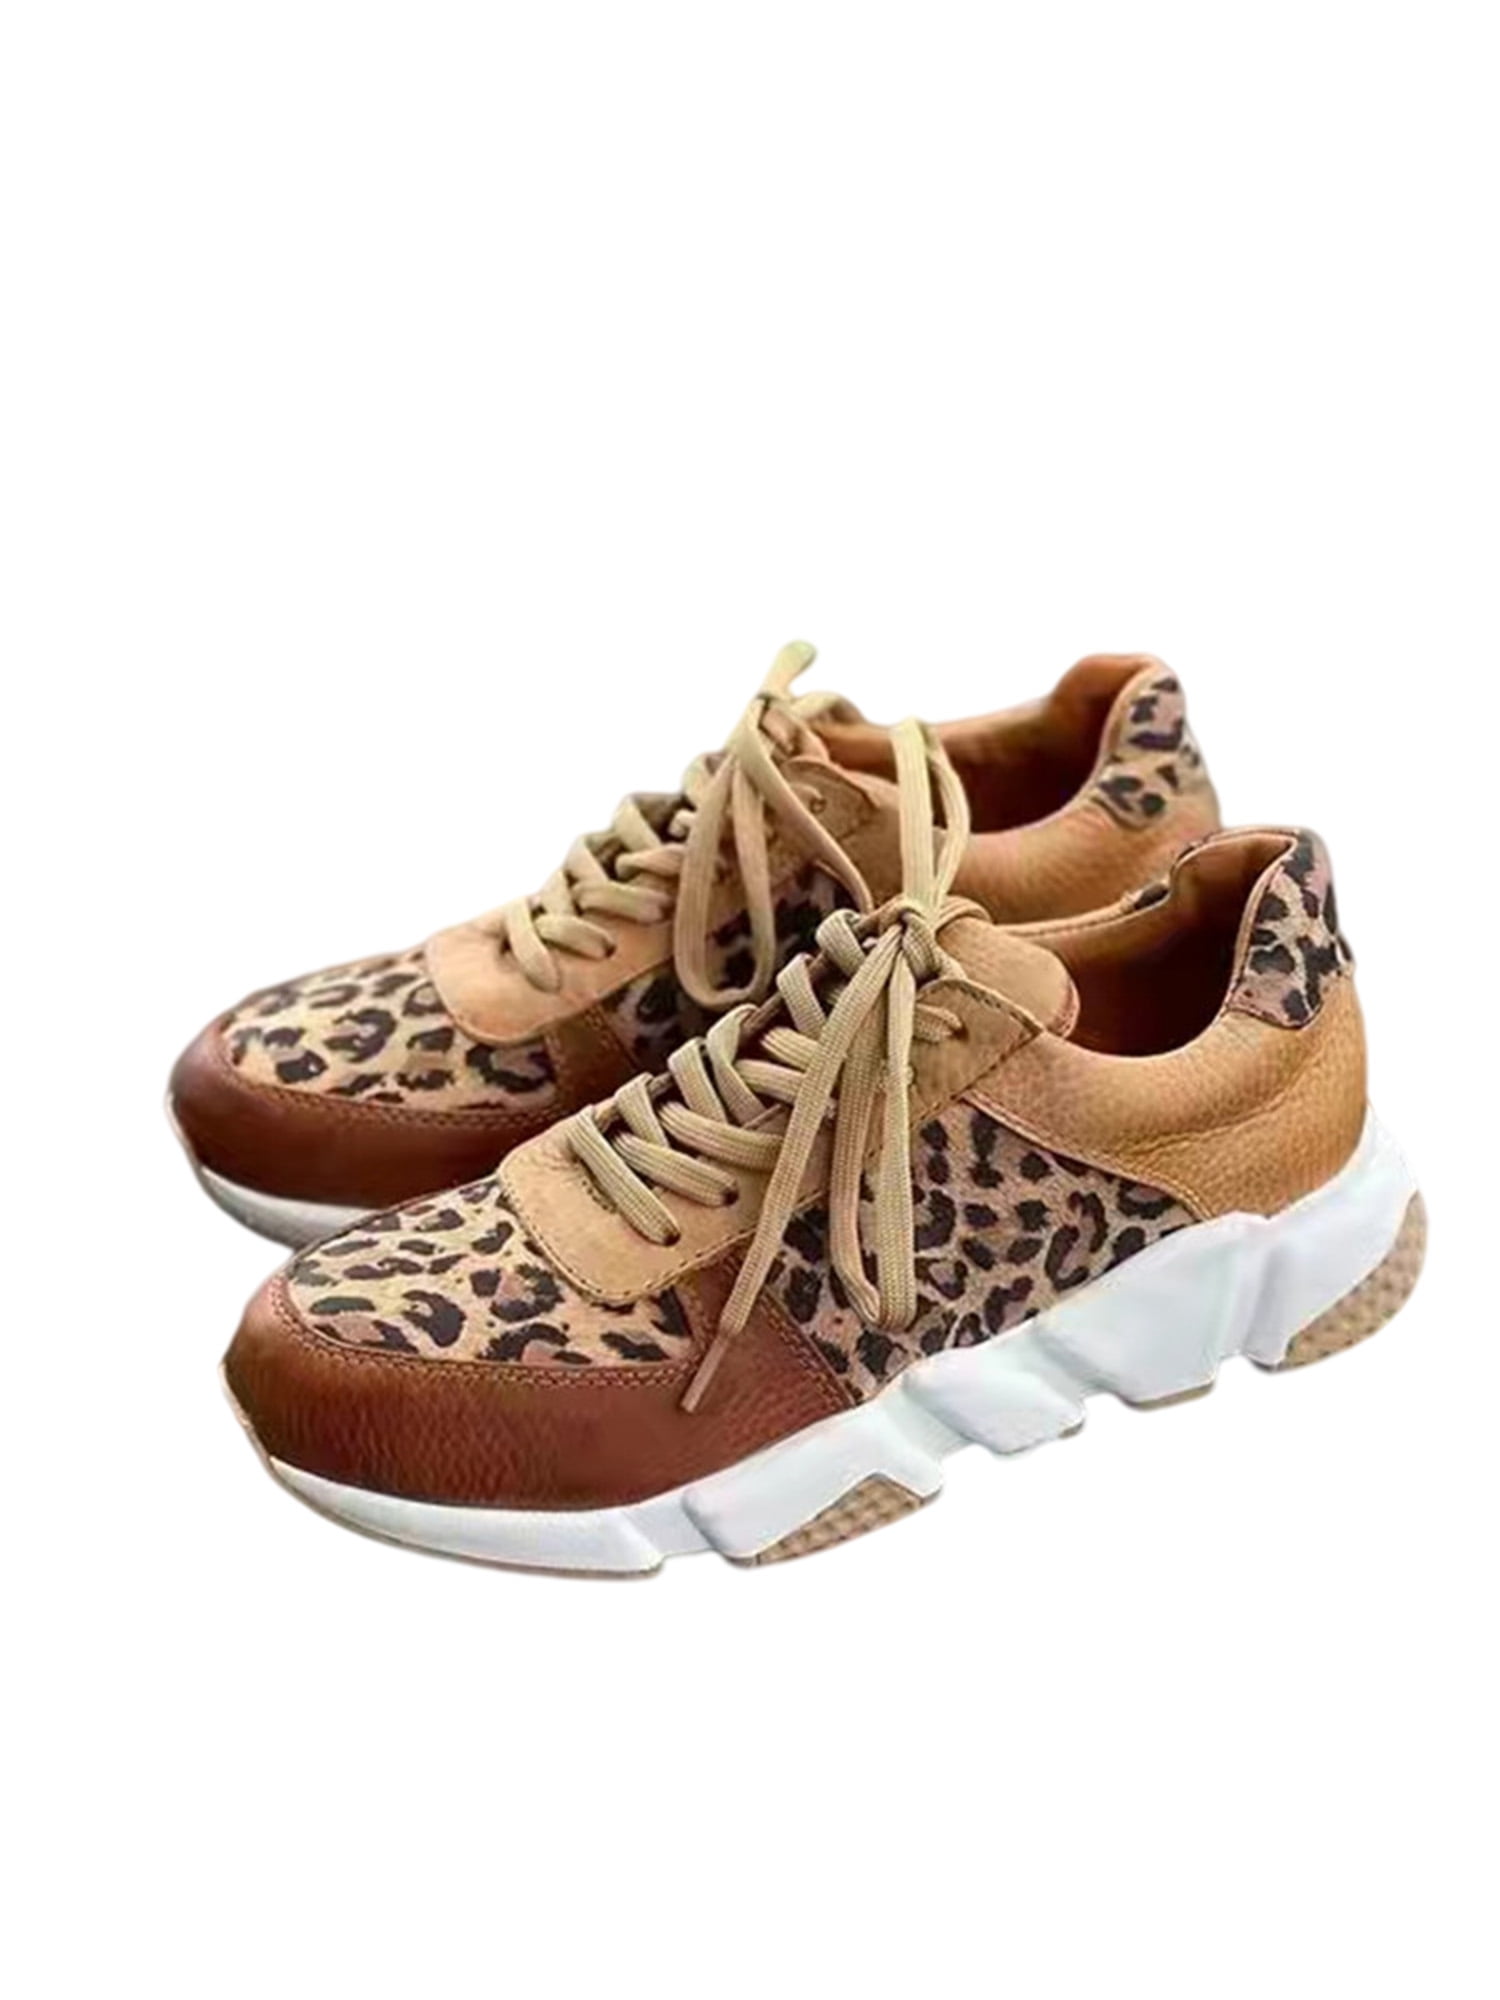 YAYADI Women Sneakers Leopard Print Trendy Running Shoes For Females Comfortable Athletic Jogging Fitness Shoes Lightweight 